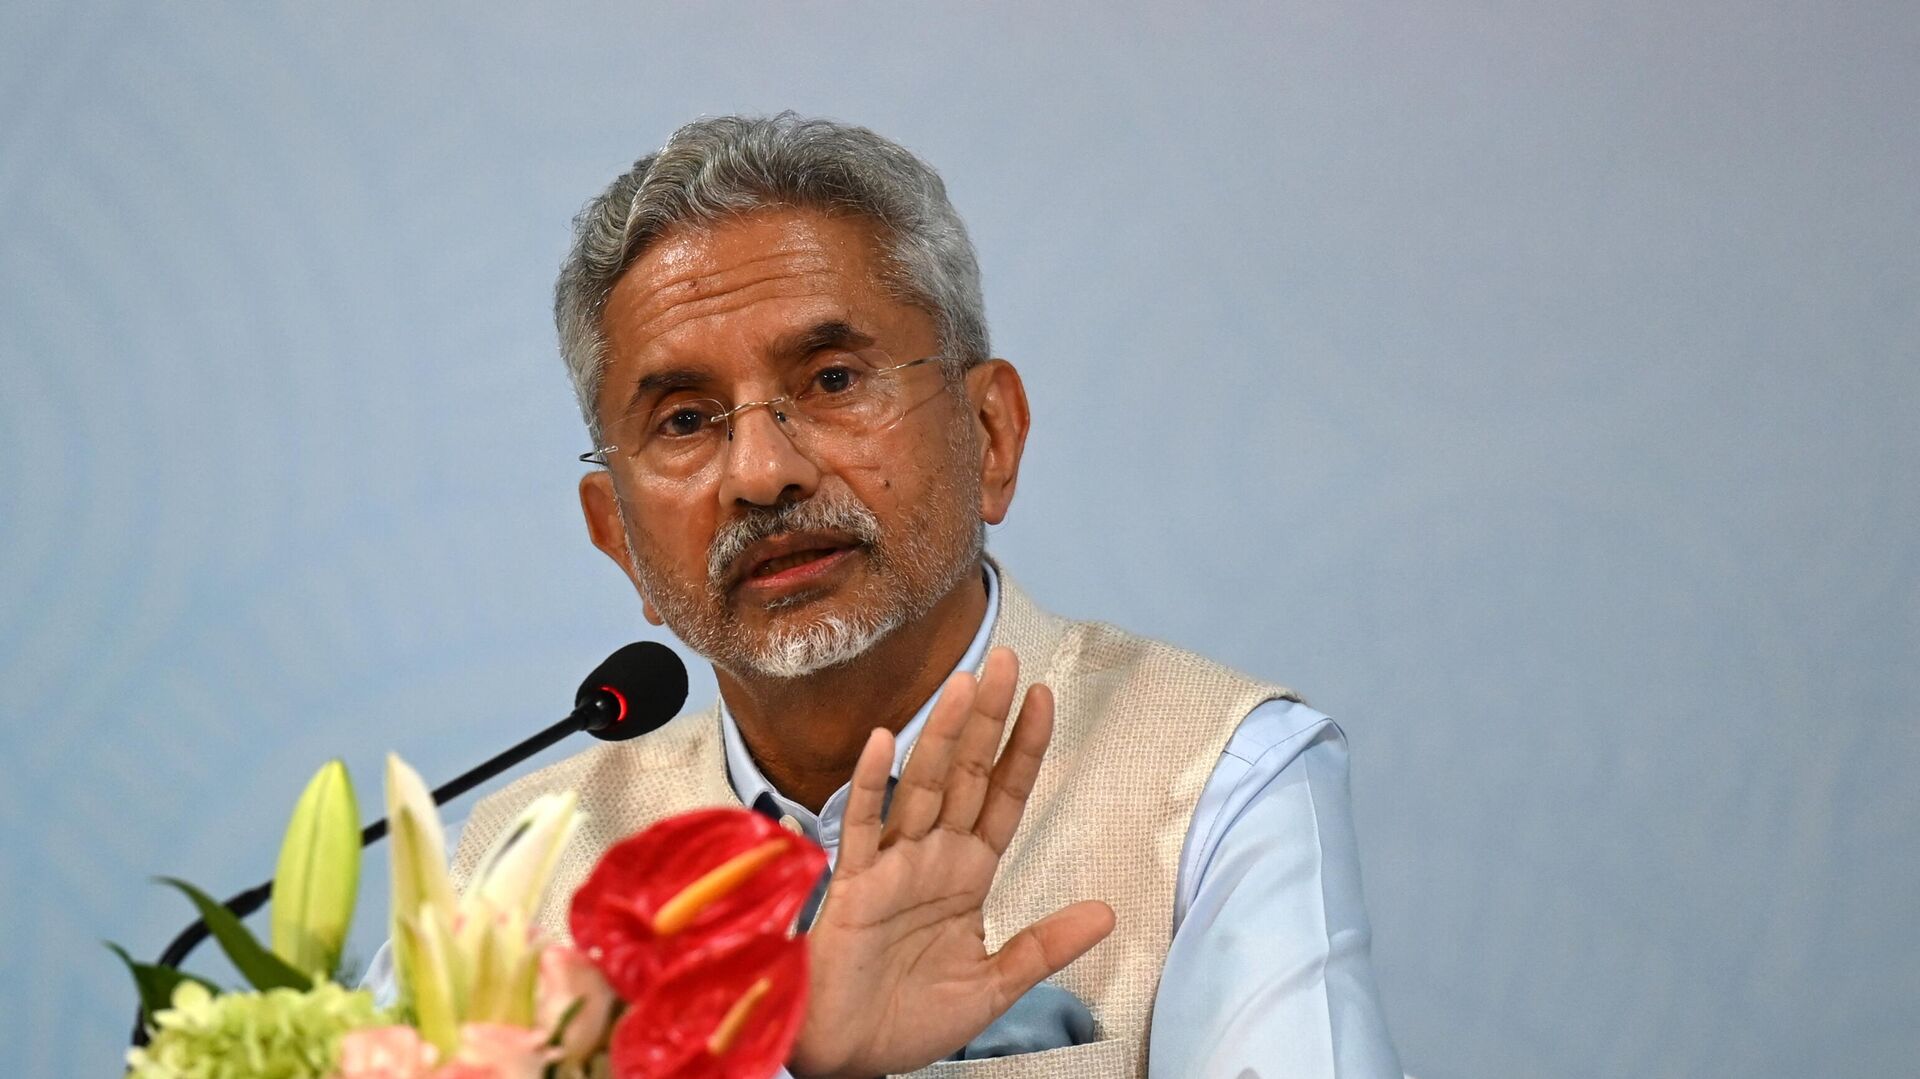 India's Foreign Minister Subrahmanyam Jaishankar gestures as he speaks during a news conference at the media centre for the Shanghai Cooperation Organization (SCO) meeting in Benaulim on May 5, 2023. (Photo by Punit PARANJPE / AFP) - Sputnik भारत, 1920, 05.12.2023